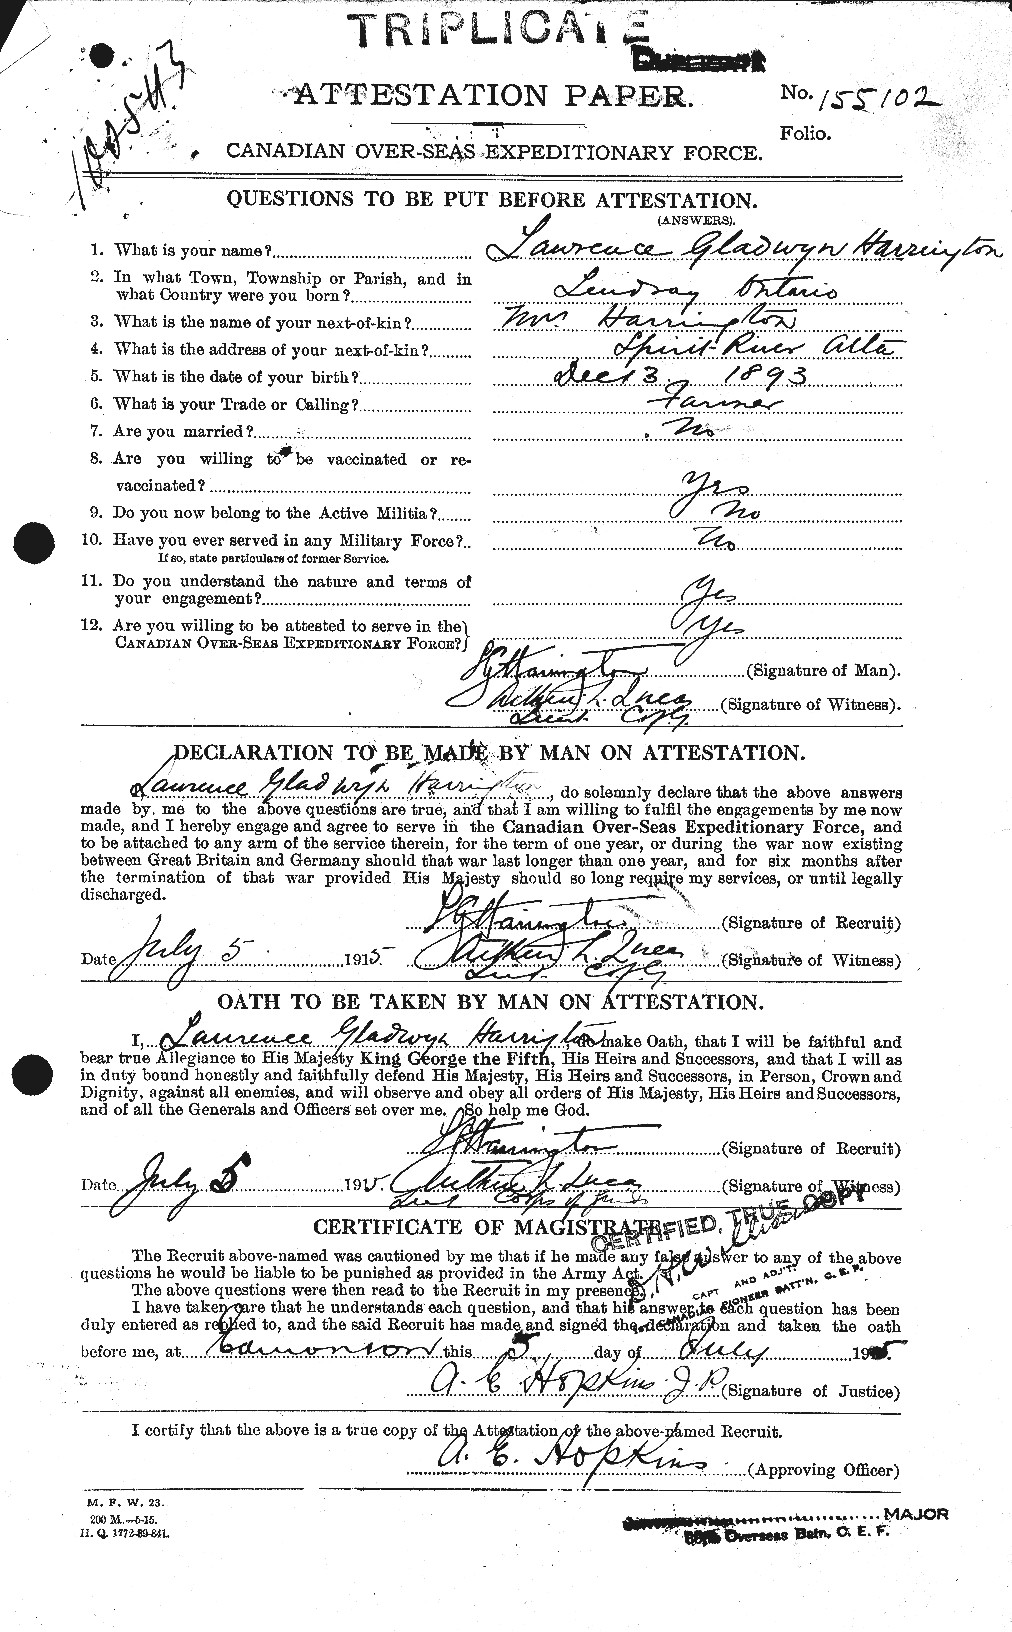 Personnel Records of the First World War - CEF 377104a